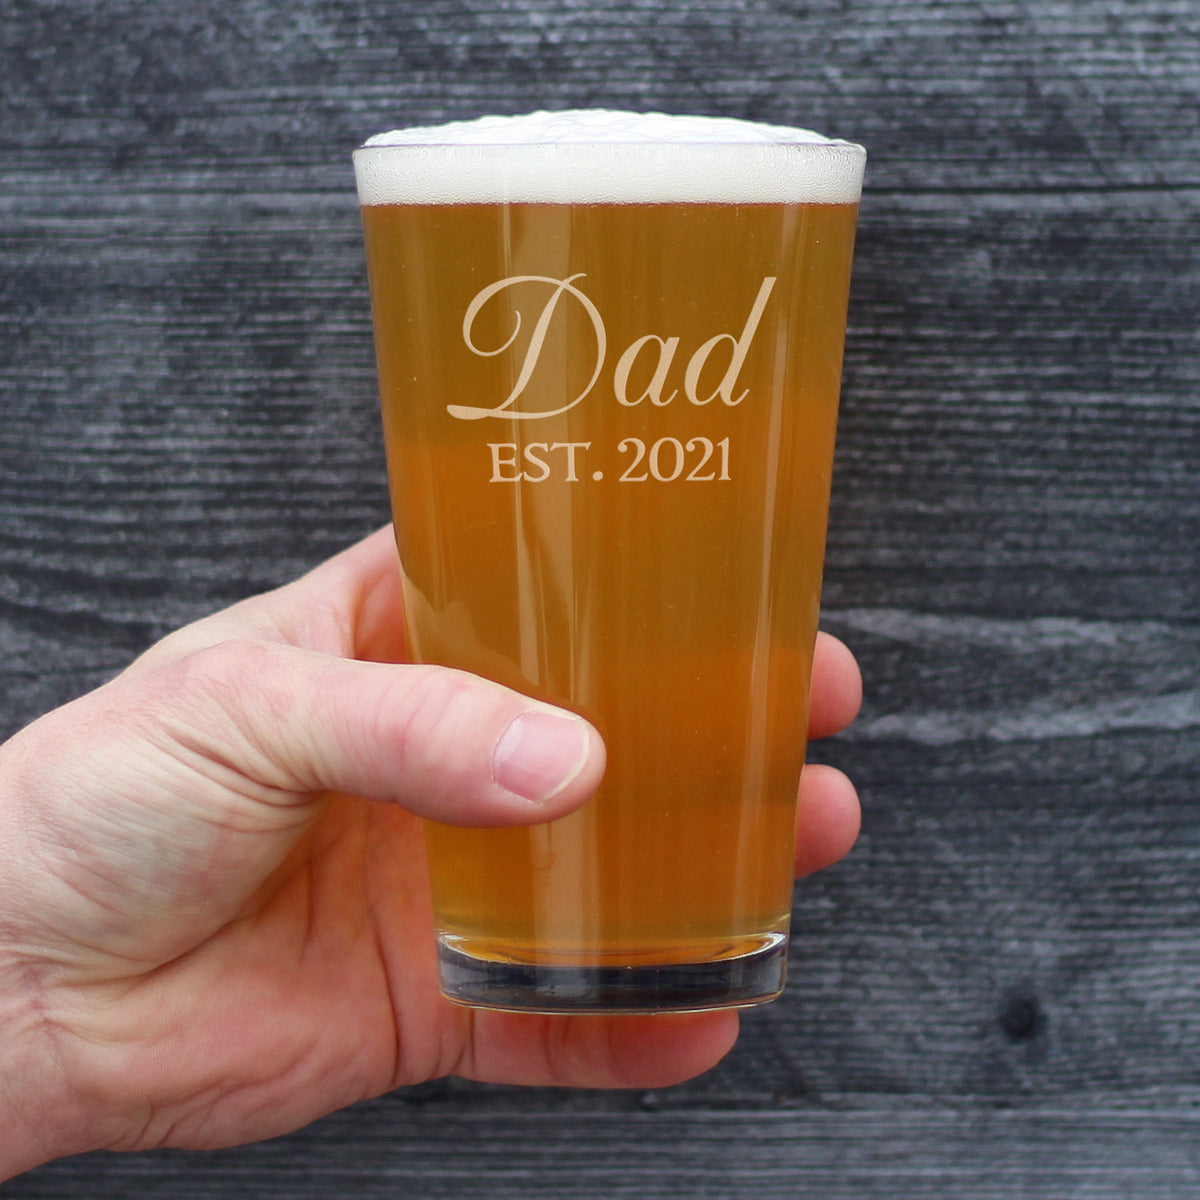 Dad Est 2021 - New Father Pint Glass Gift for First Time Parents - Decorative 16 Oz Glasses